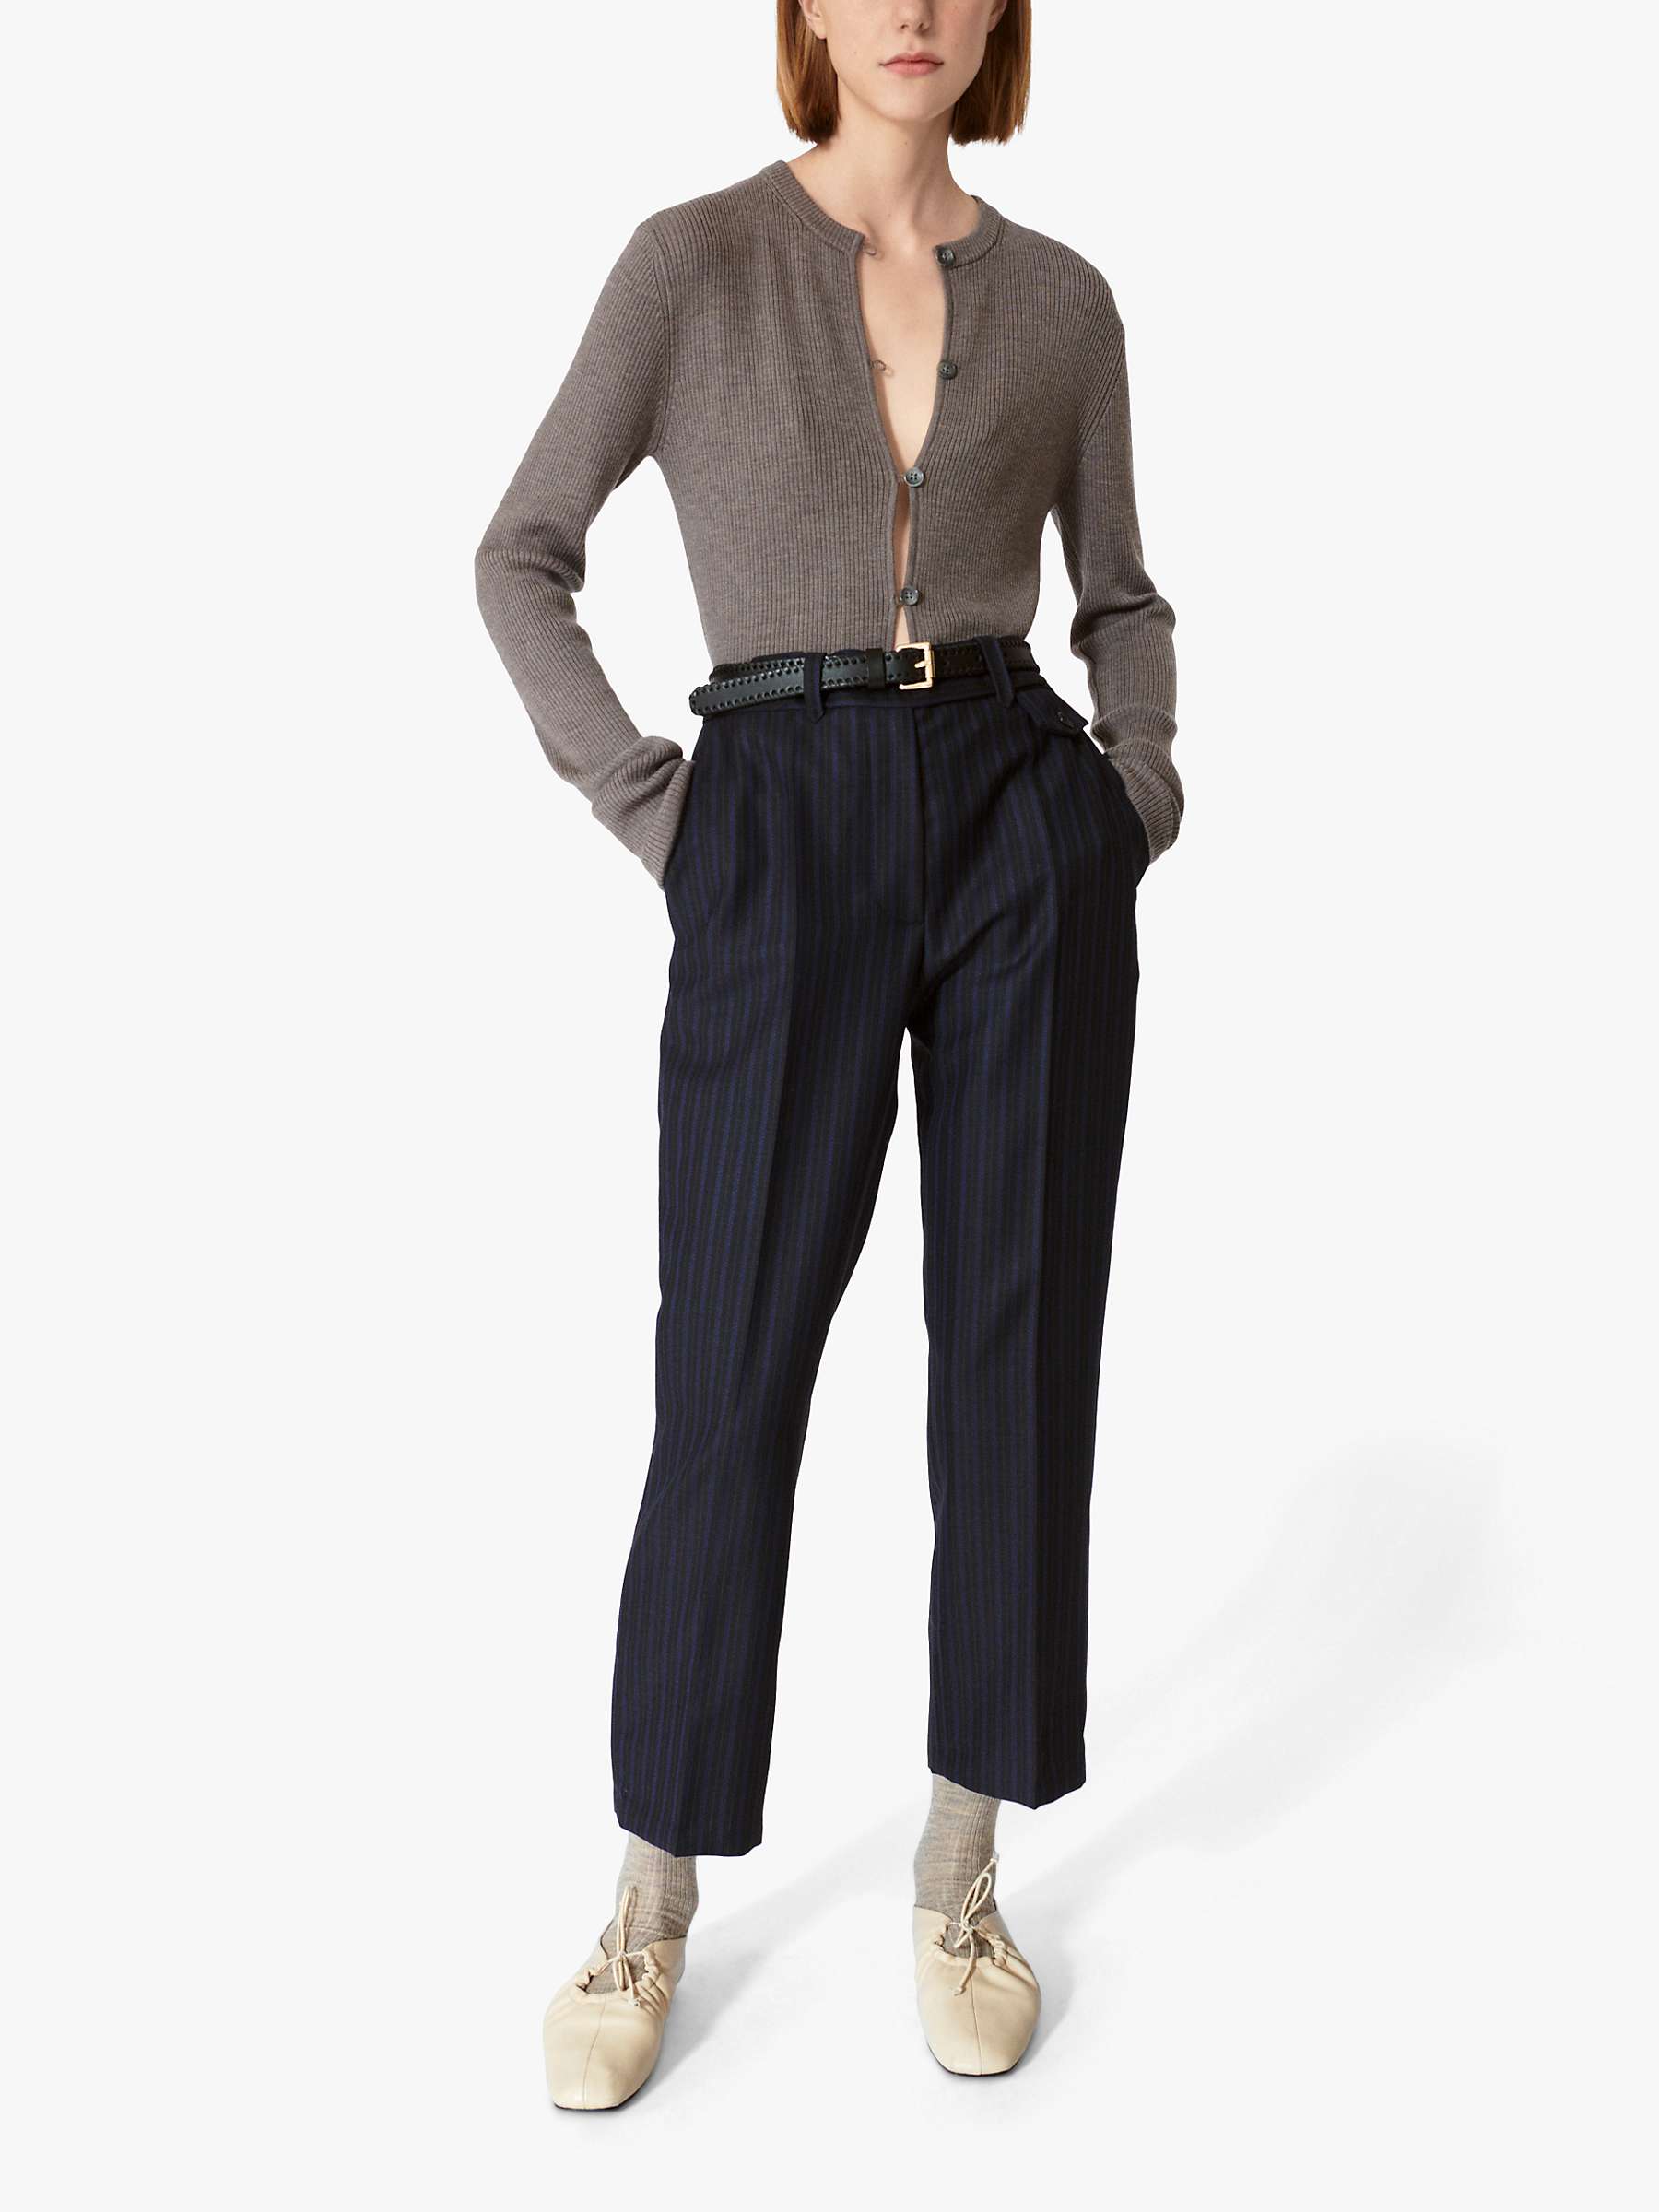 Buy Lovechild 1979 Coppola Striped Cropped Wool Trousers, Black/Multi Online at johnlewis.com